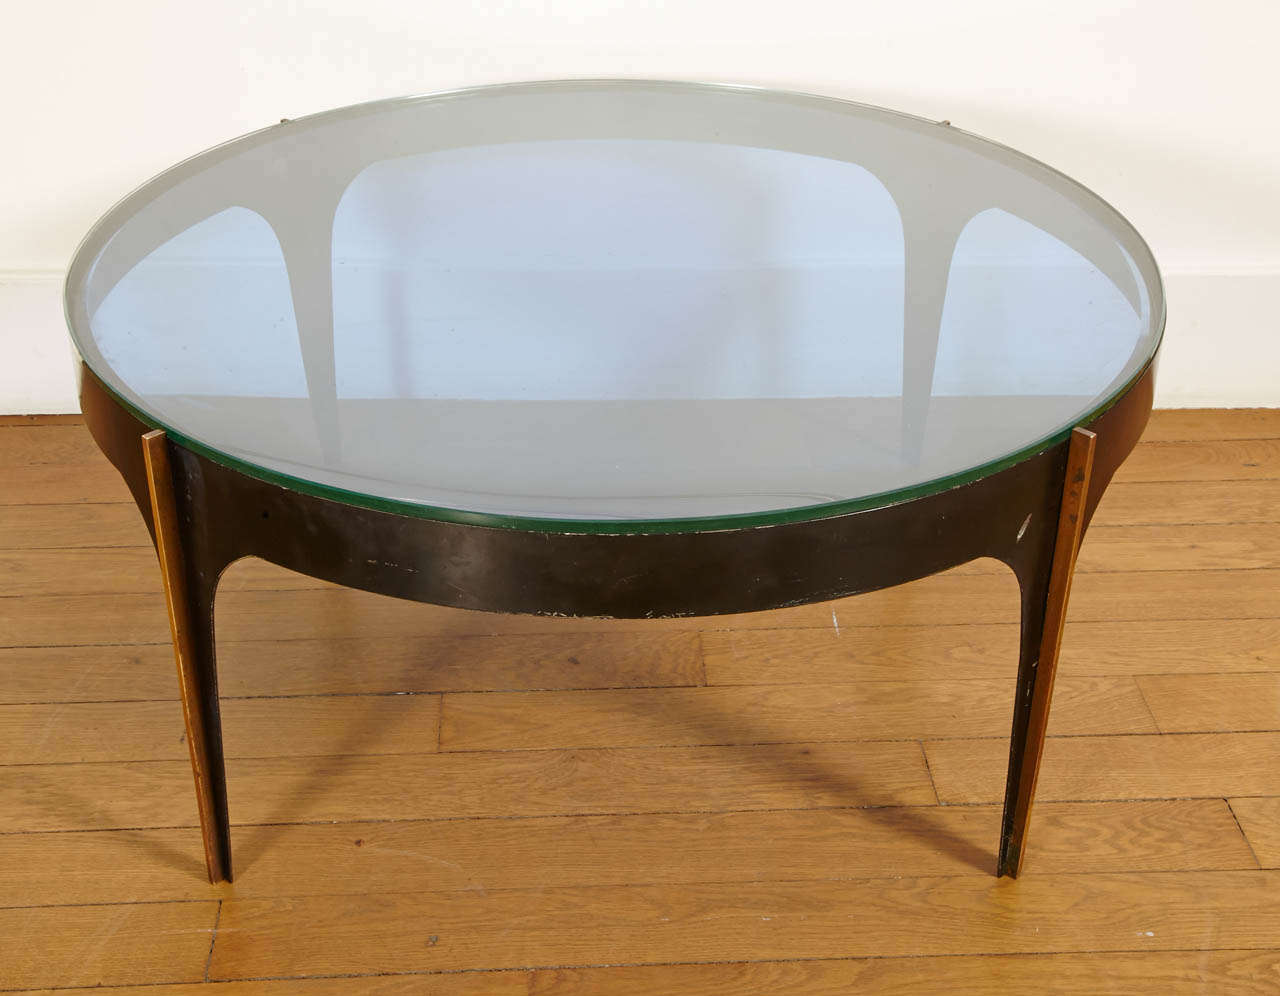 Patinated Exceptional Coffee Table with Glass Top by Fontana Arte, Italy circa 1950-55